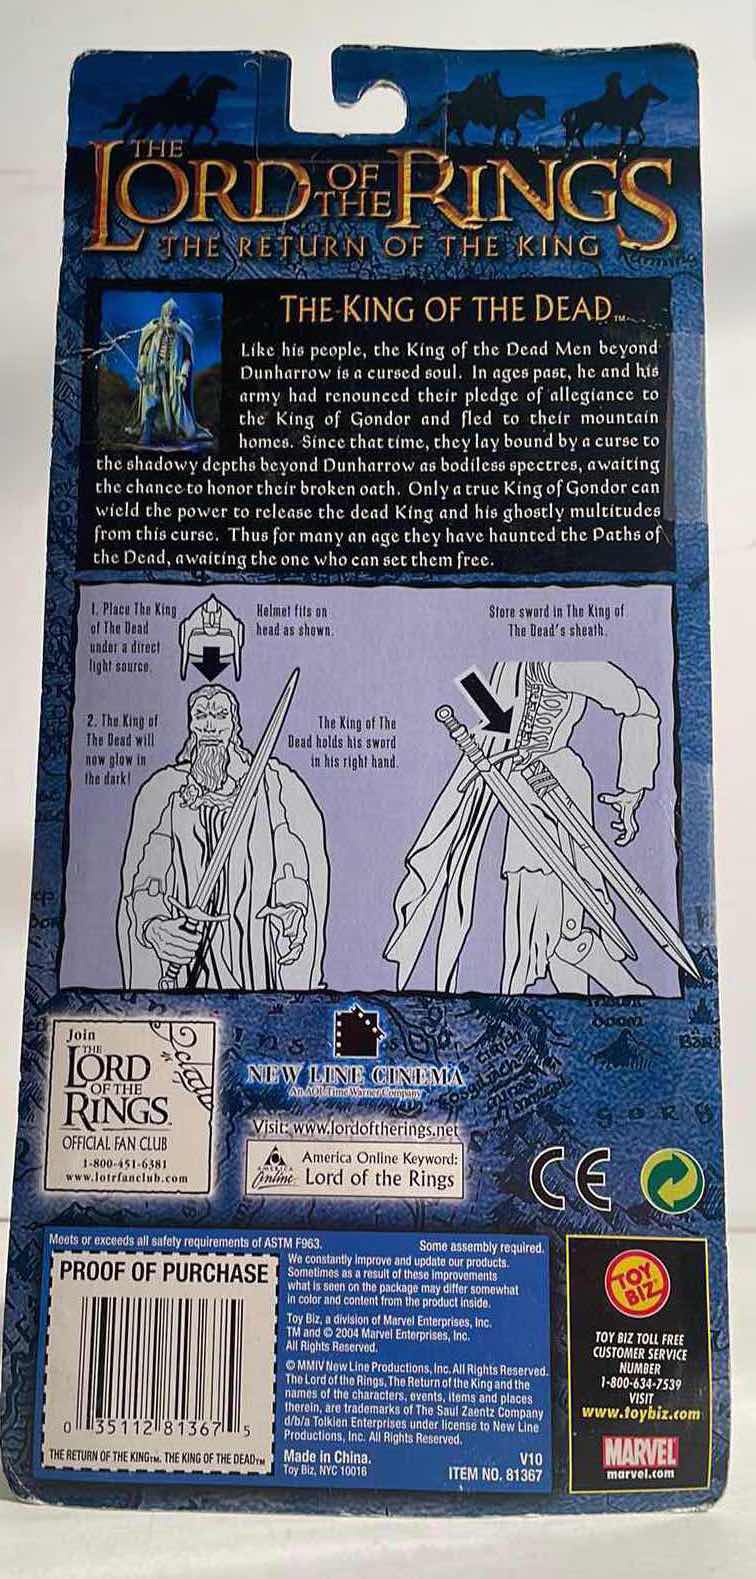 Photo 2 of NIB LORD OF THE RINGS RETURN OF THE KING “THE KING OF THE DEAD” ACTION FIGURE RETAIL PRICE $26.99